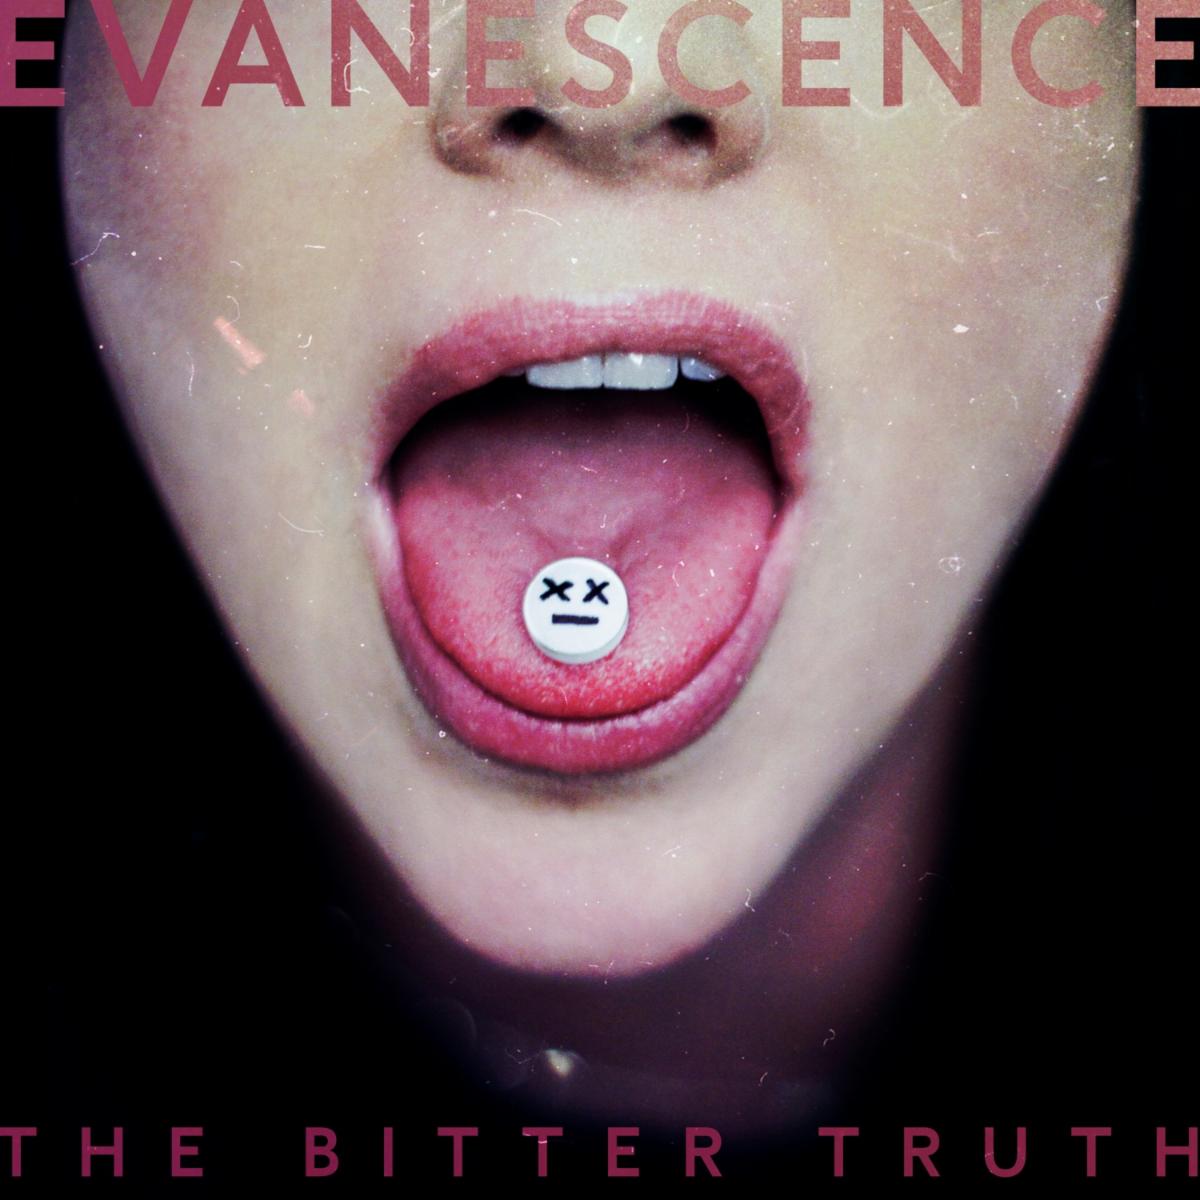 Evanescence Release New Single "Better Without You"